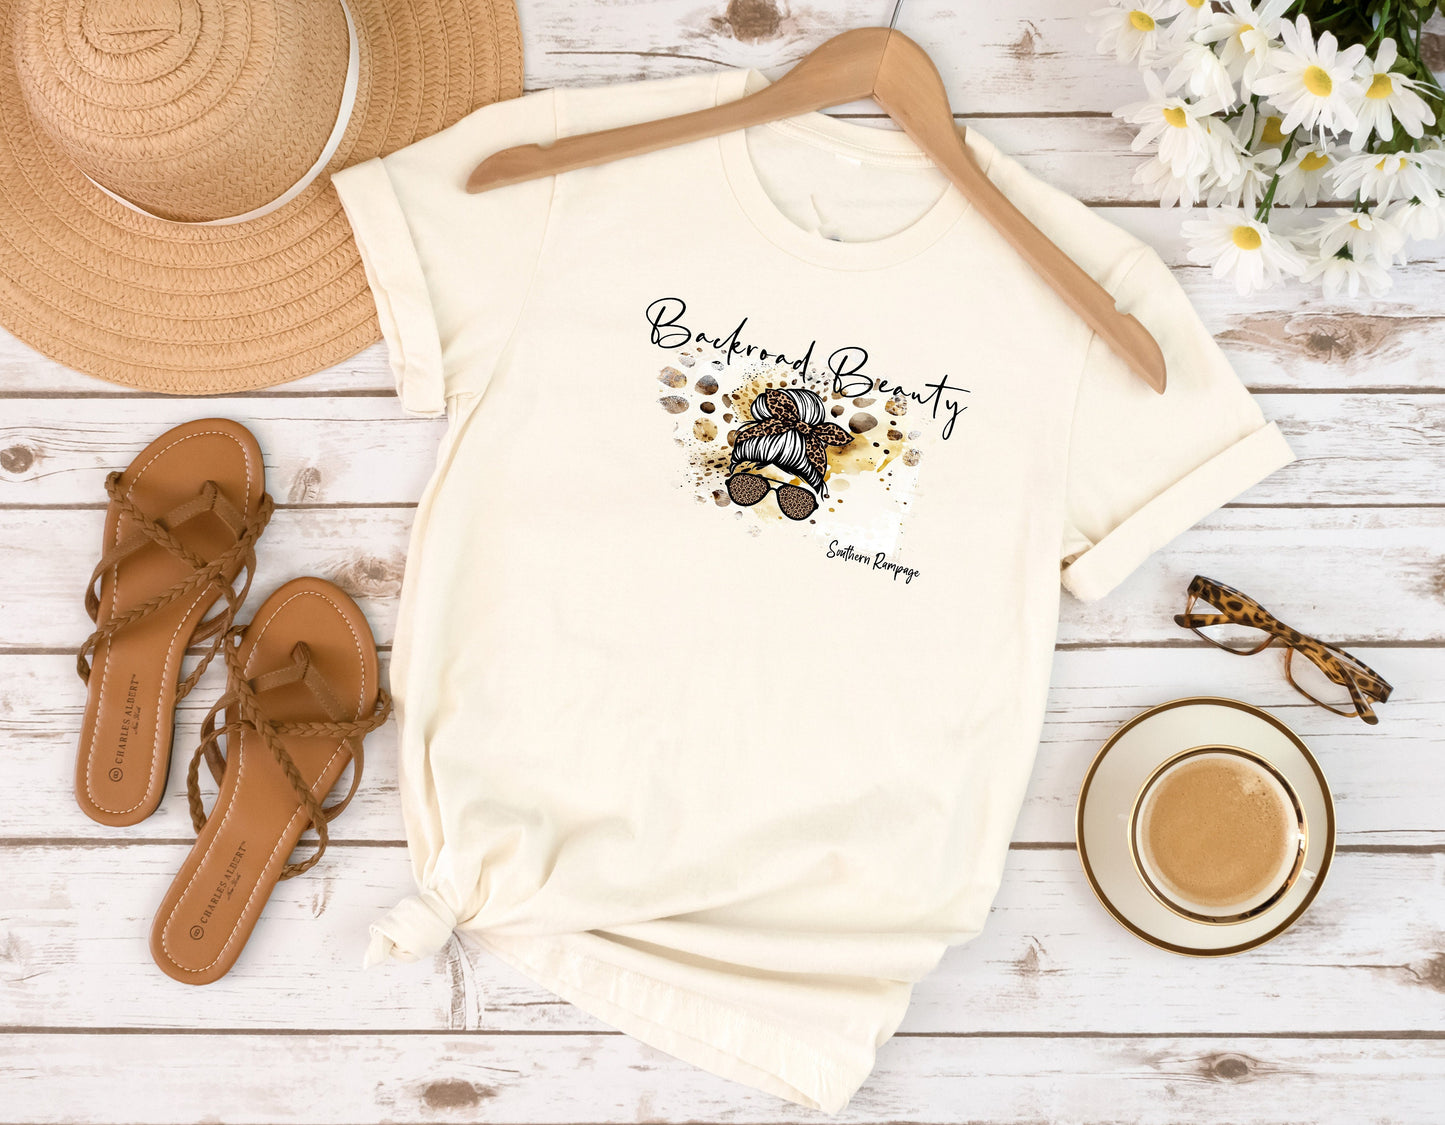 New Release Backroads Beauty T Shirt, Tshirt, Graphic T's  100% Cotton Tee, Motivational, Western, Country Girl